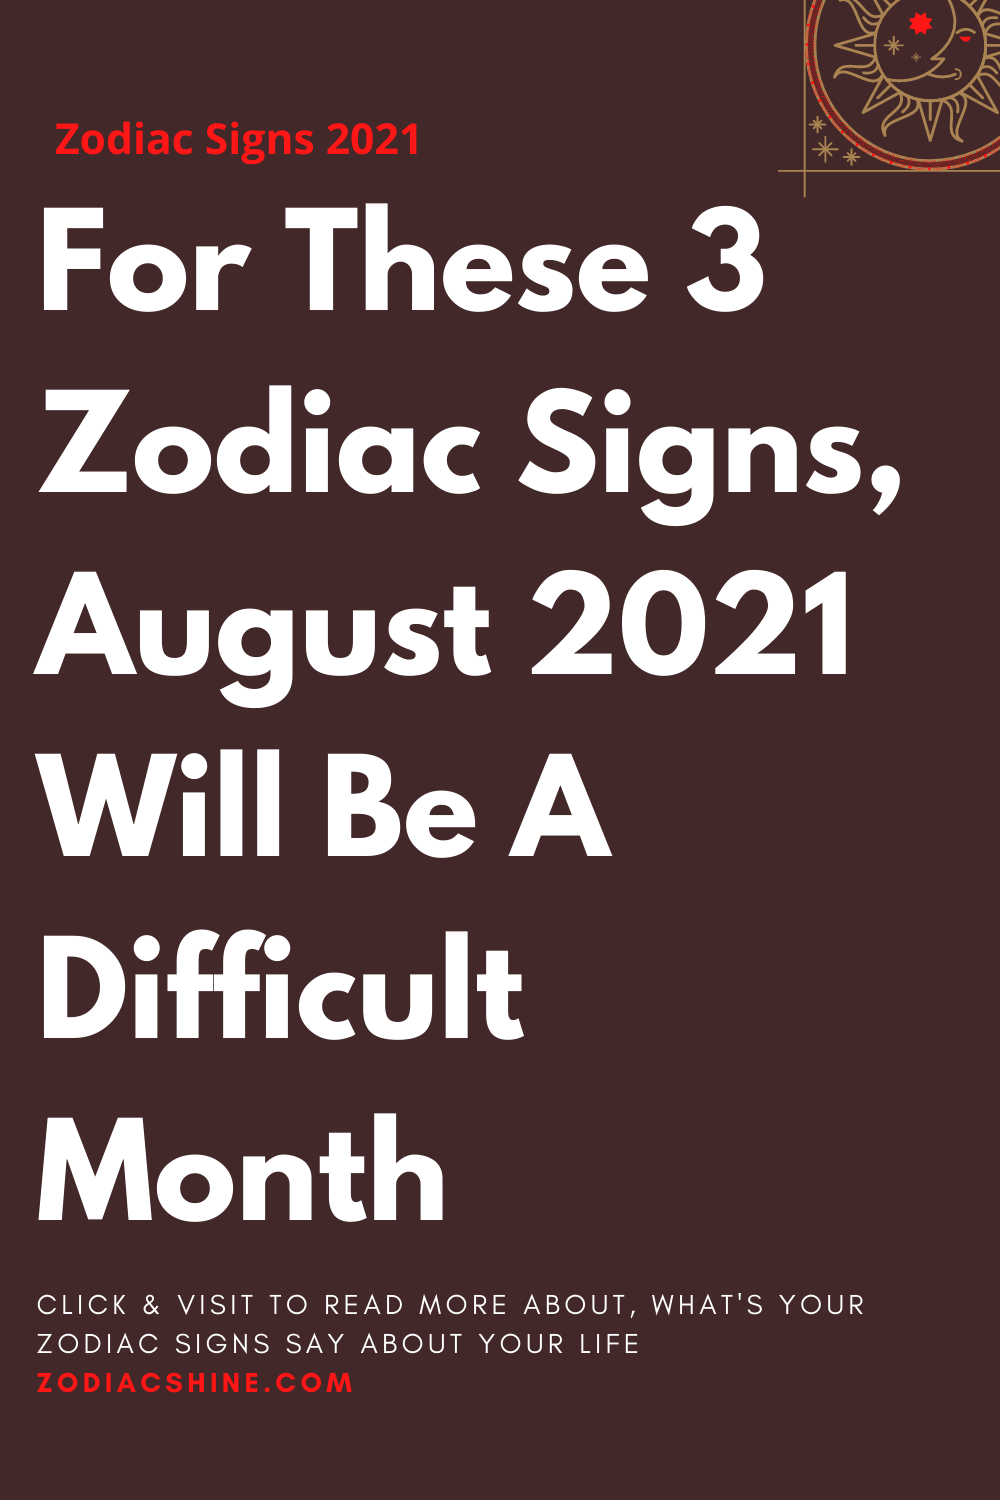 For These 3 Zodiac Signs, August 2021 Will Be A Difficult Month